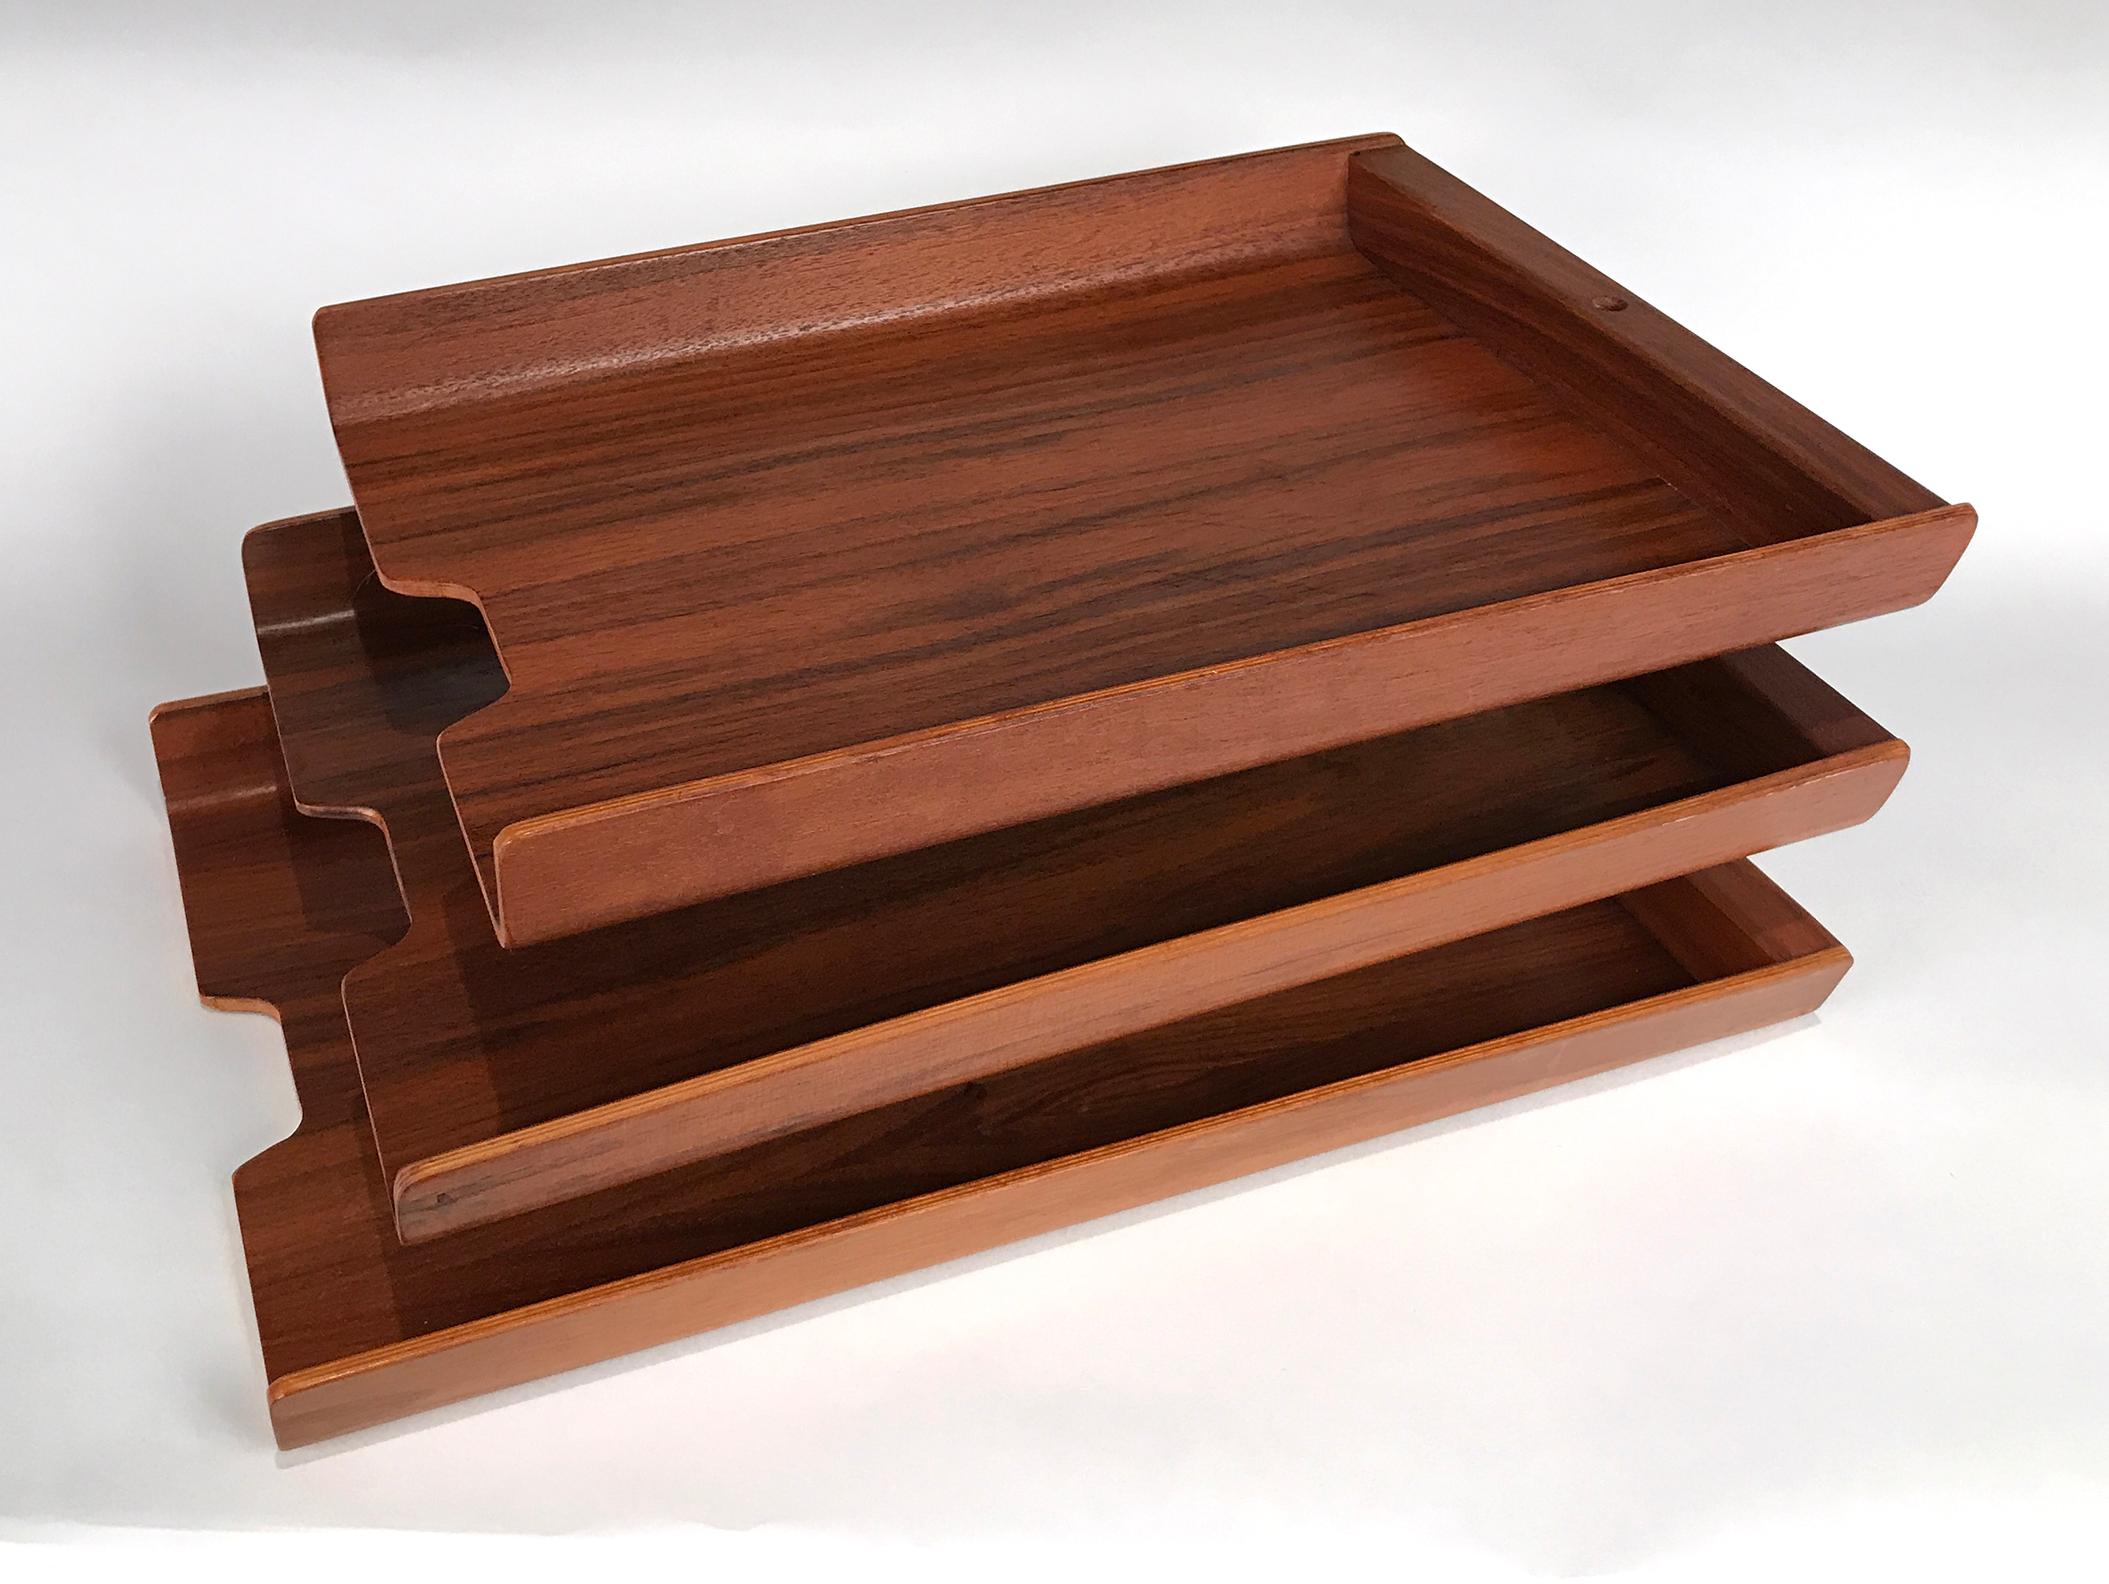 Extremely rare letter tray designed by George Nelson & Associates for Howard Miller Clock Company, circa 1950. Consists of three teak plywood trays that swivel on an aluminum pin.